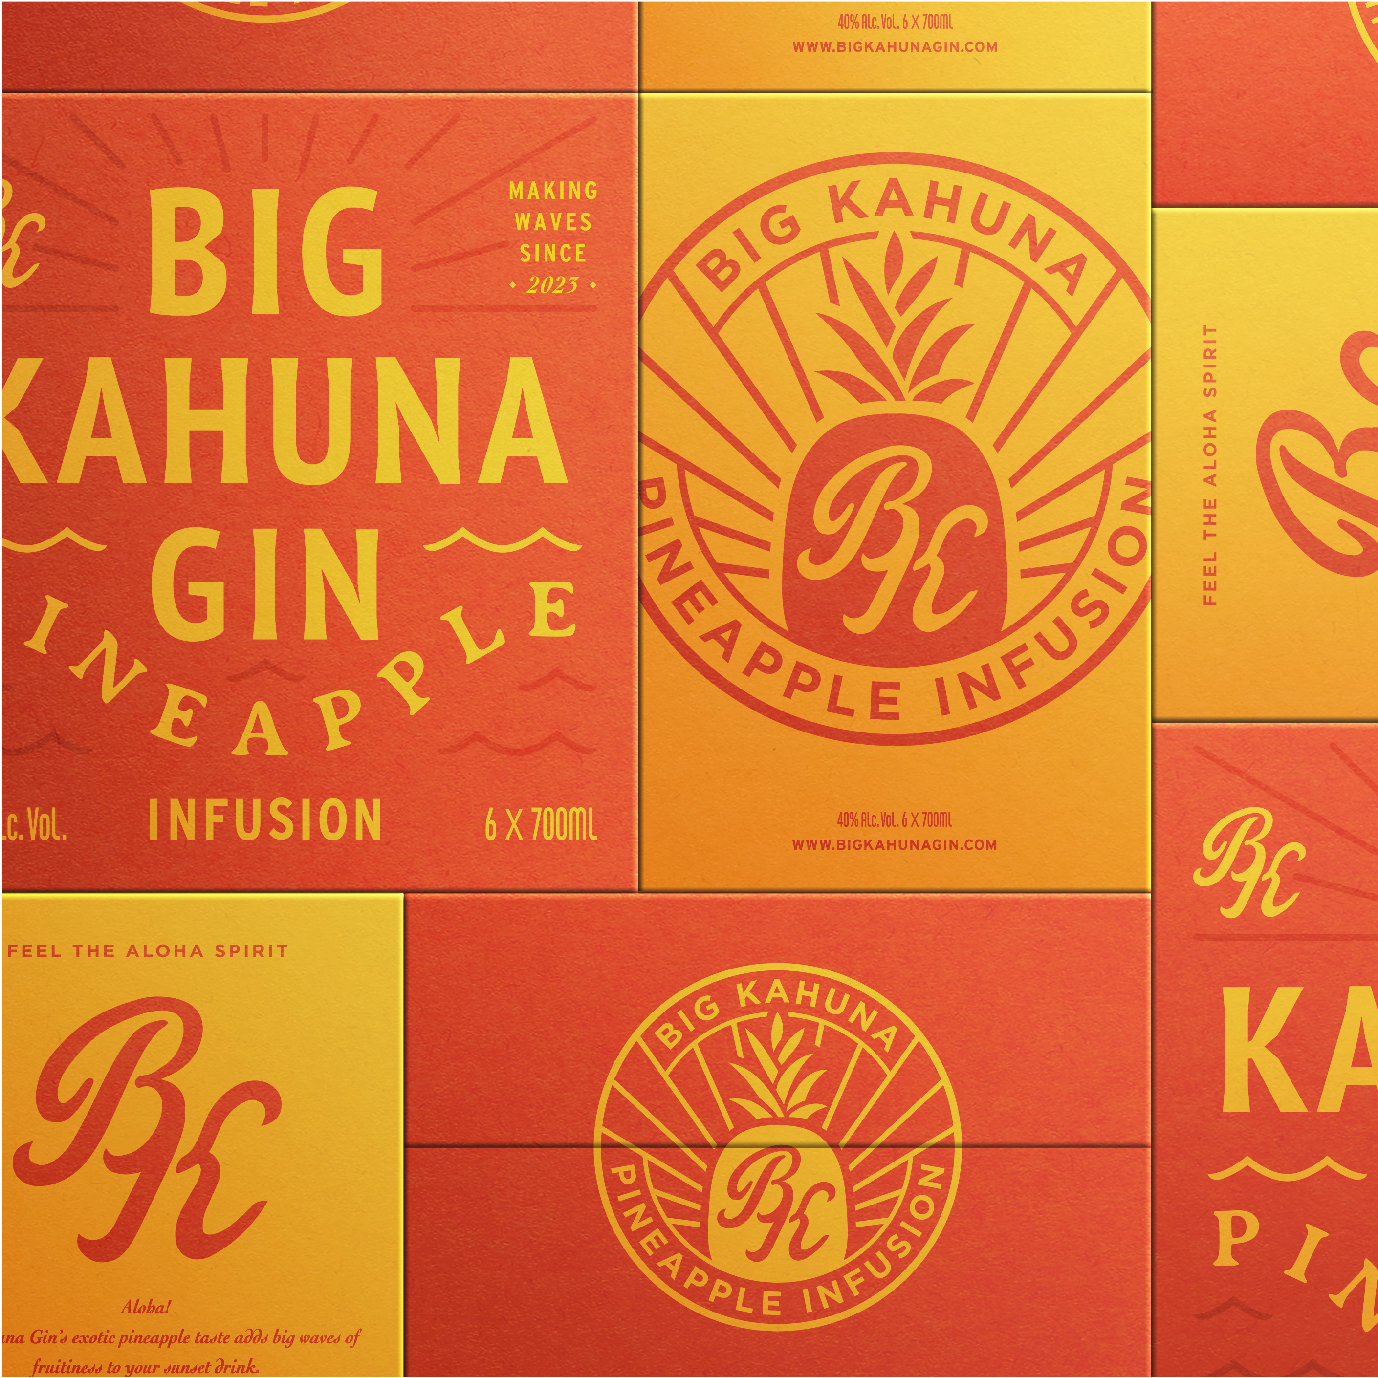 Leaning Into The Pineapple With Packaging & Gin Big Branding - Kahuna | Dieline Inspiration Flavor Design